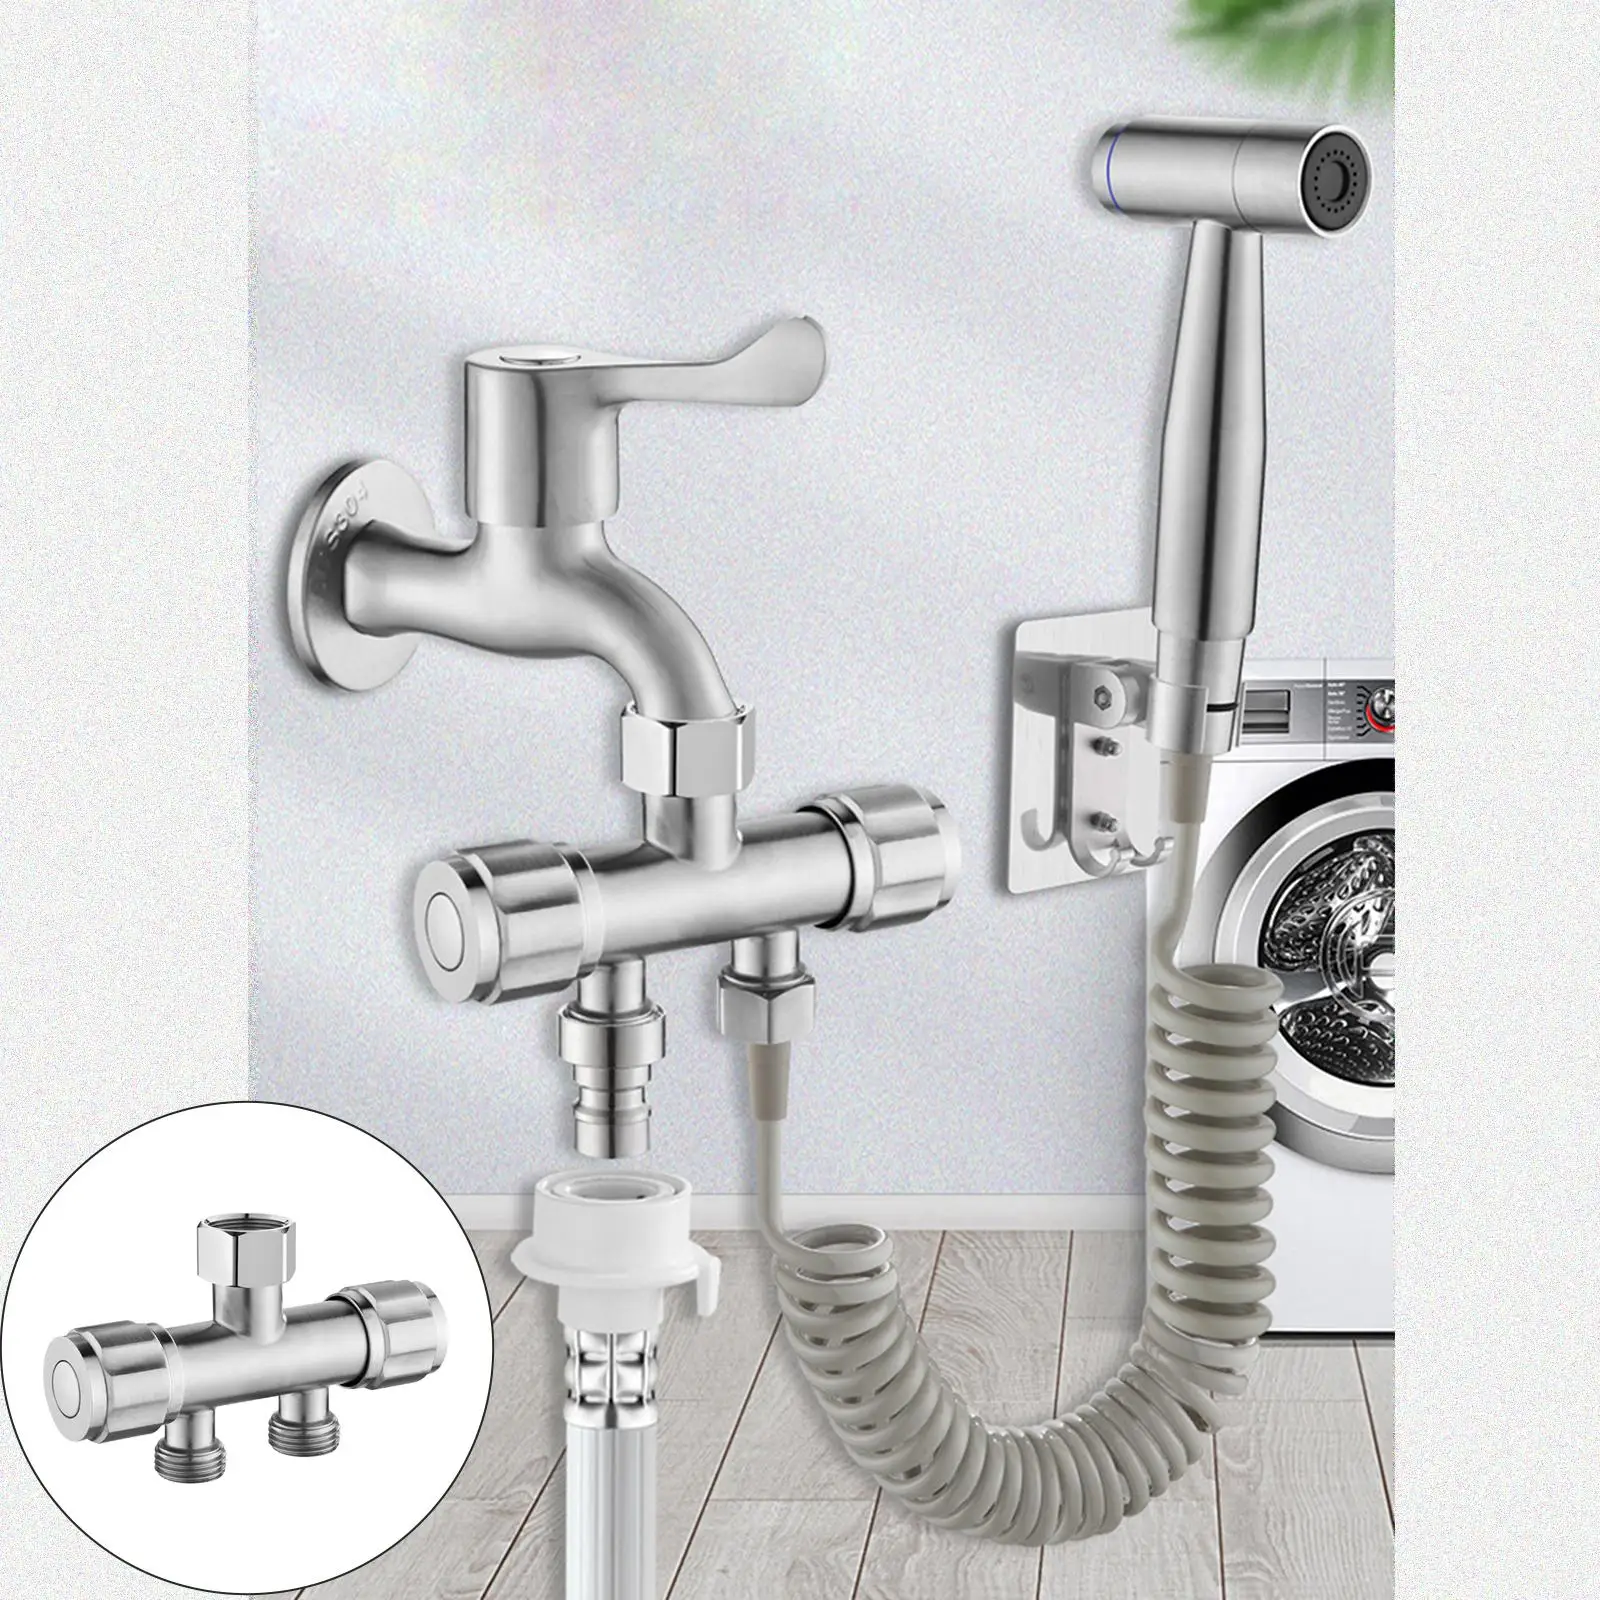 Bathroom Faucet Valve Single Inlet Double Outlet Double Control Valve for Shower Head Toilet Sink Basin Water Heater